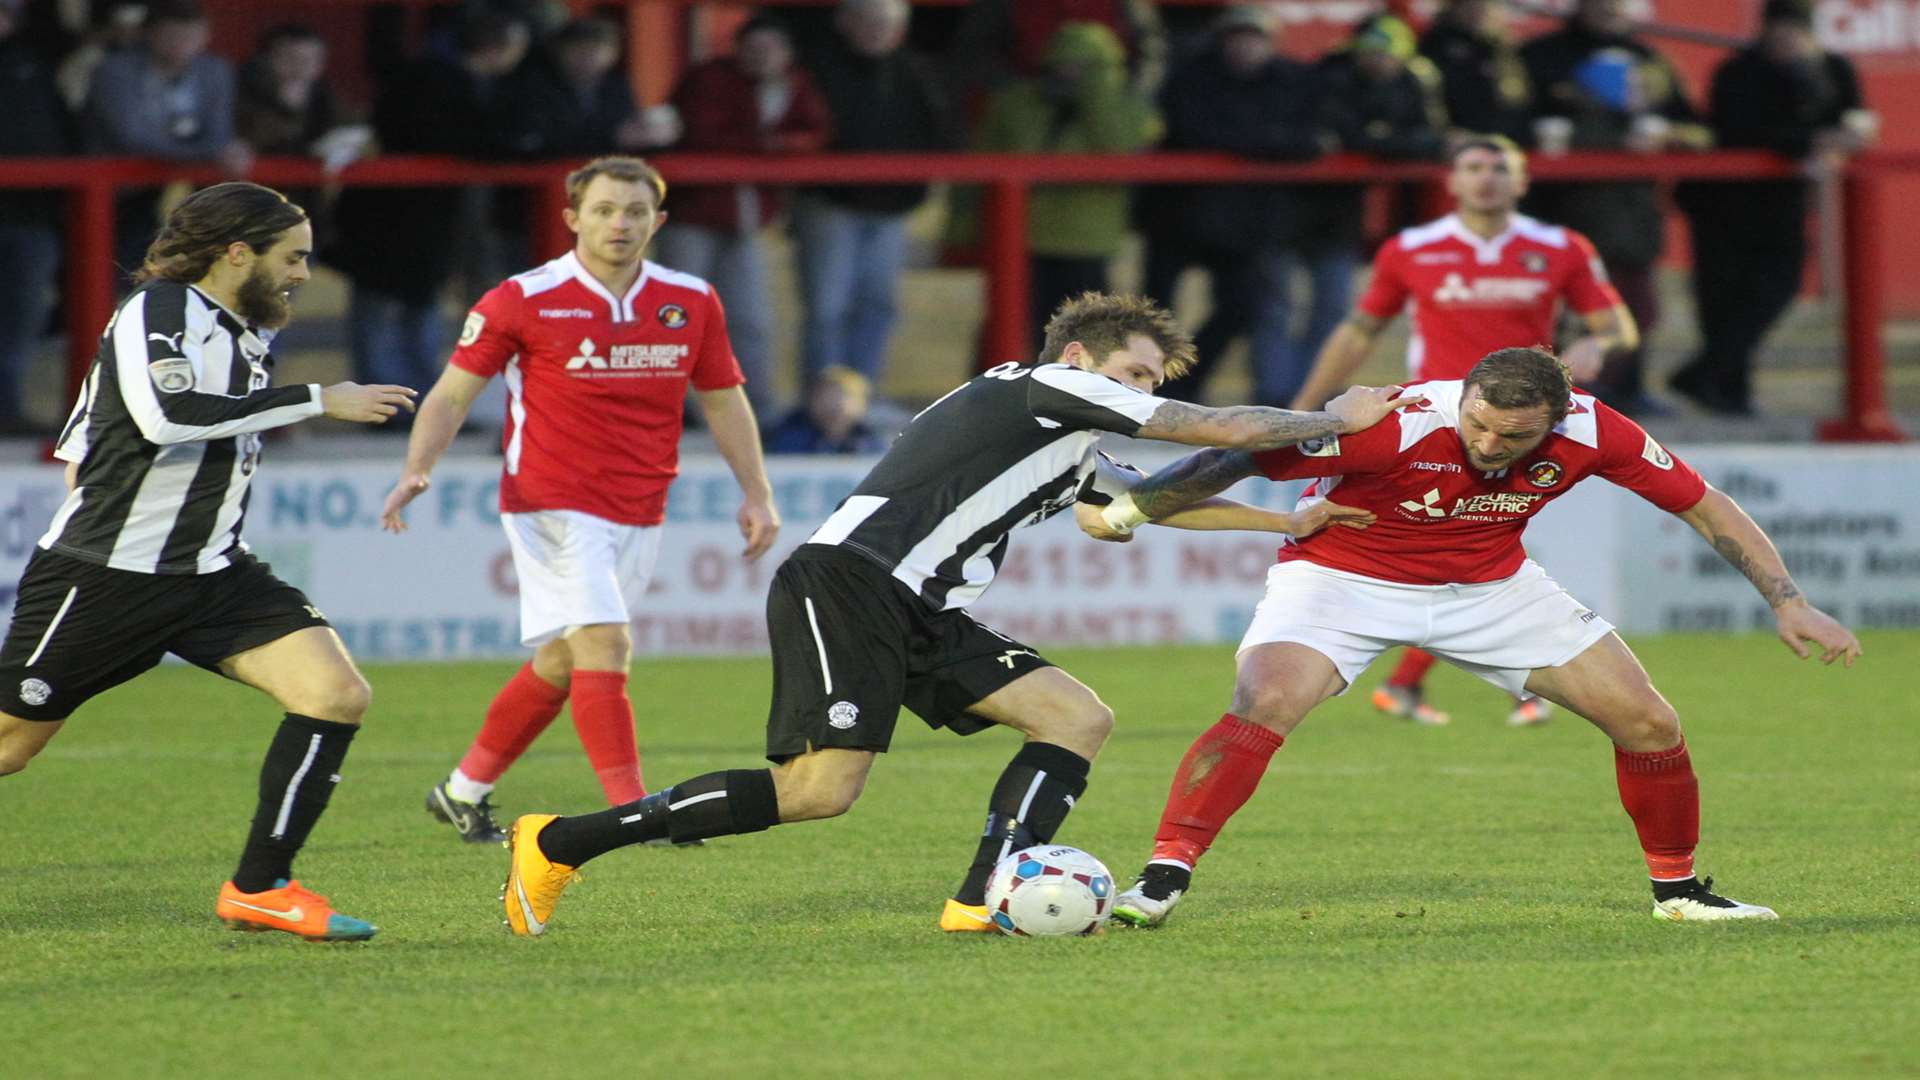 Danny Kedwell in the thick of the action on his Ebbsfleet debut Picture: John Westhrop